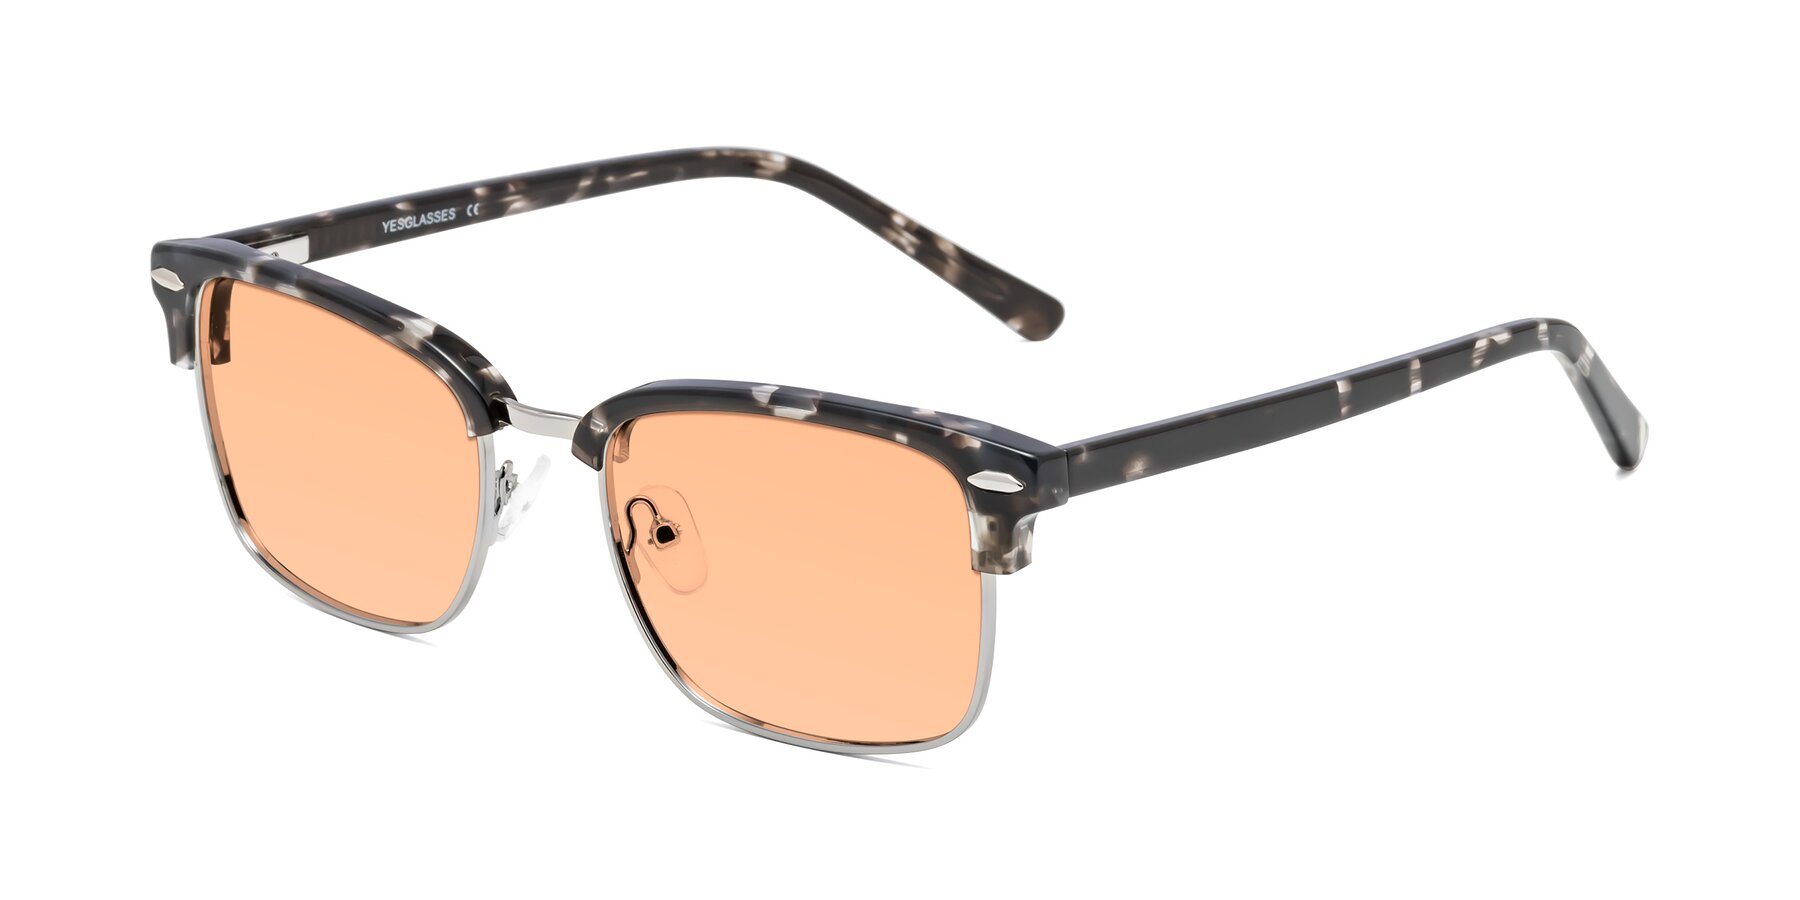 Angle of 17464 in Tortoise-Silver with Light Orange Tinted Lenses